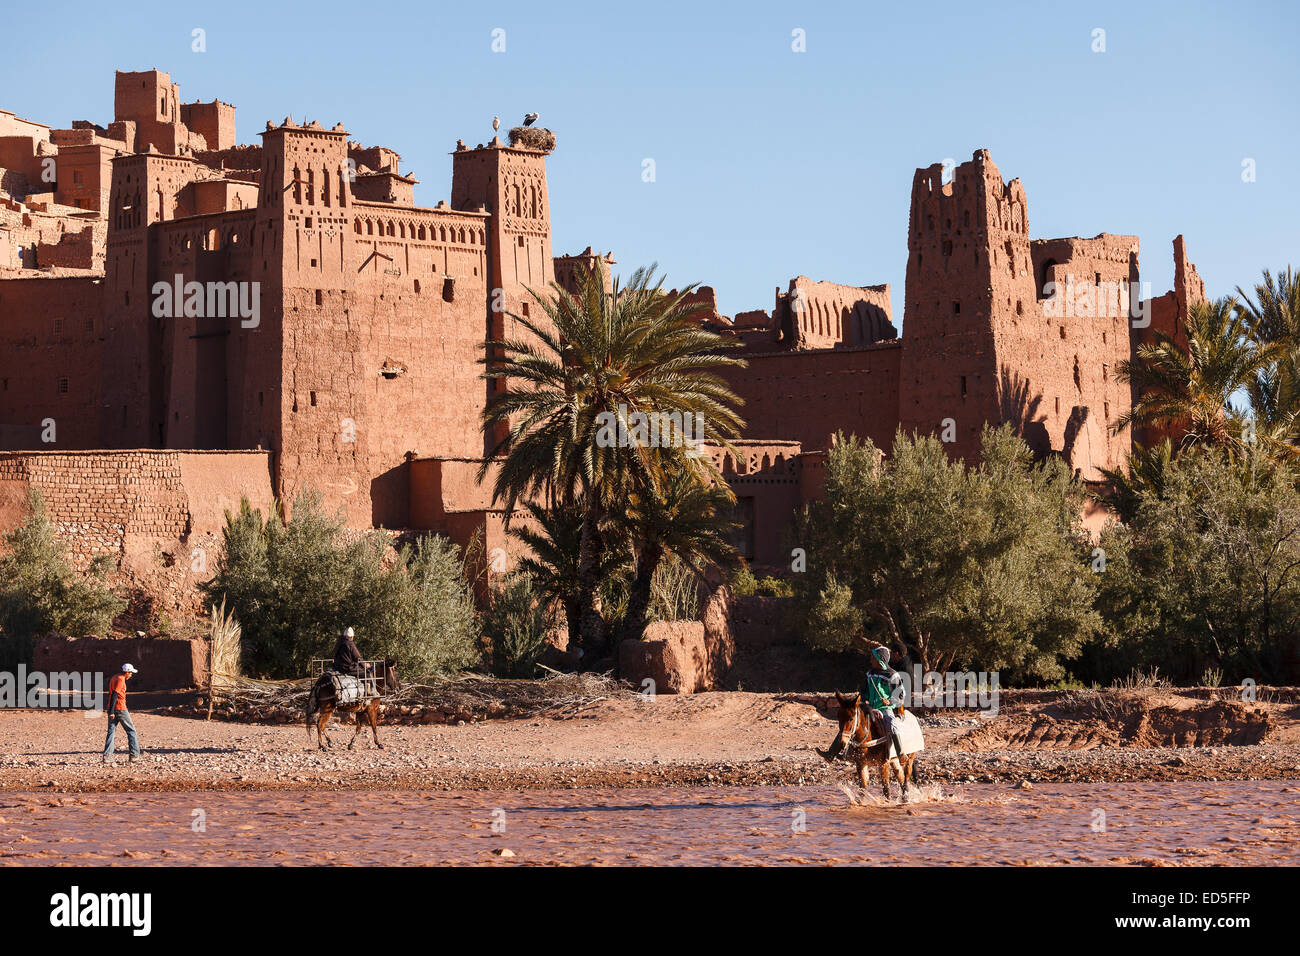 Donkey and Ait ben haddou. Atlas mountian. Morocco. North Africa. Africa Stock Photo